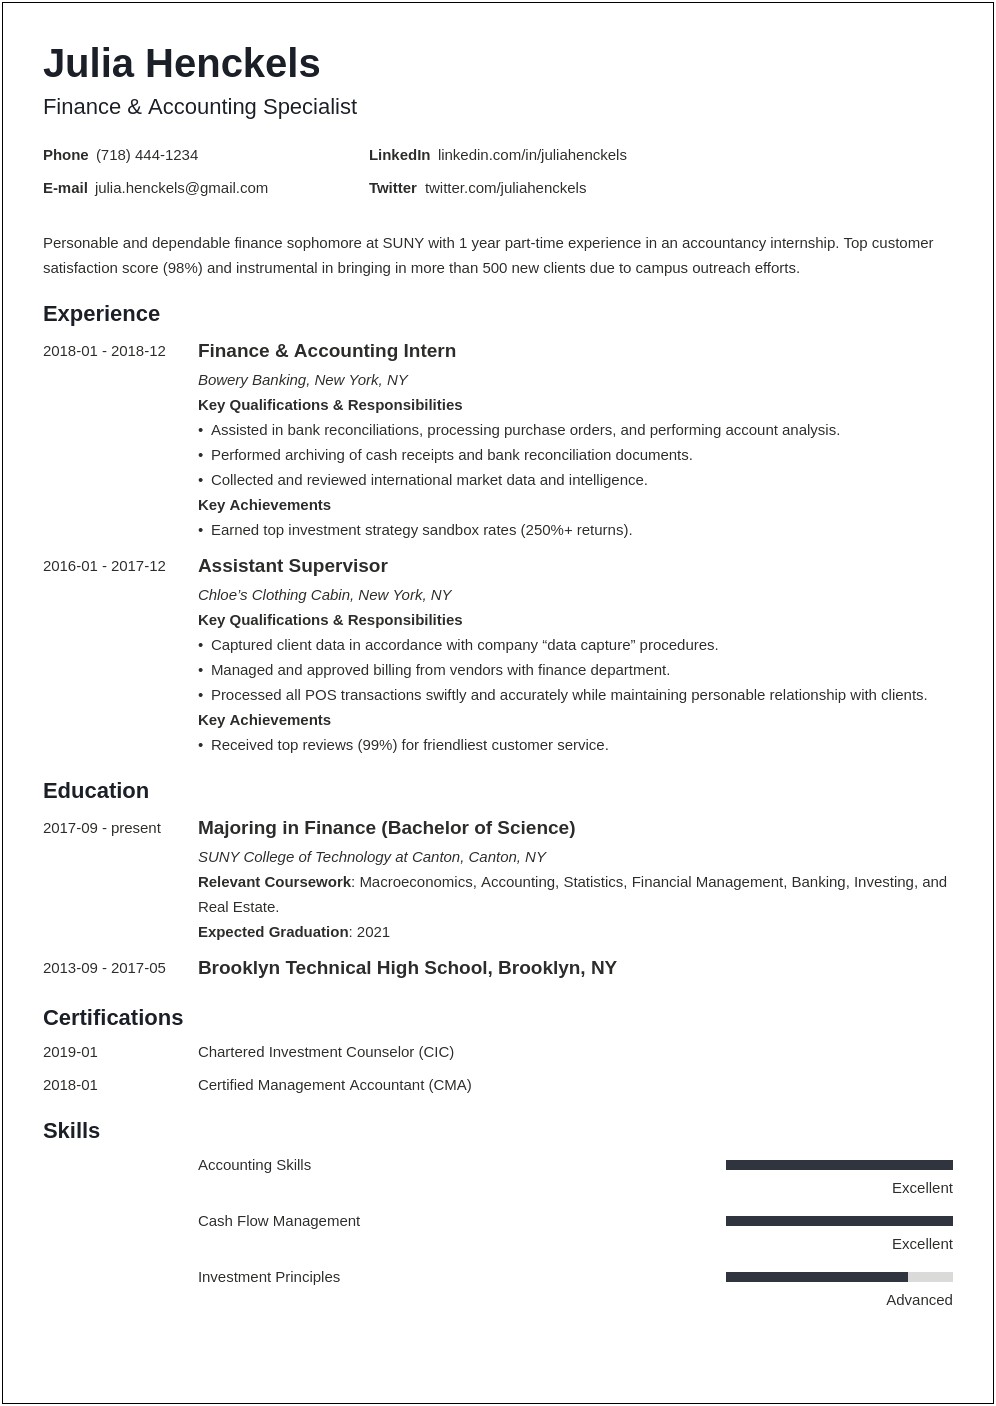 Resume Objective Statement For College Graduate